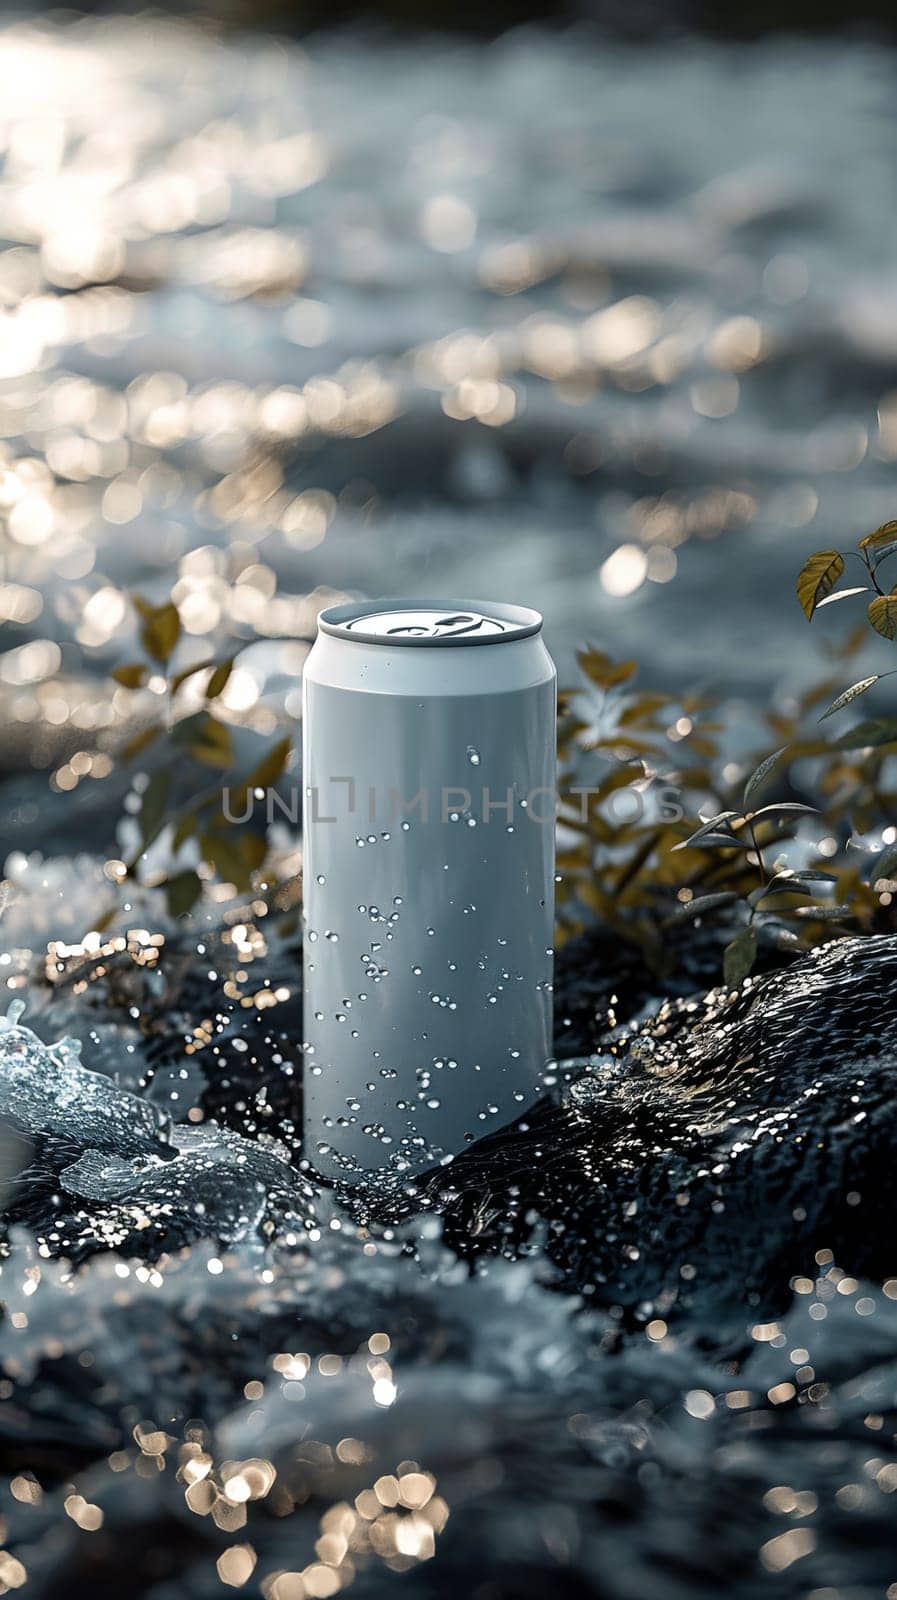 Mockup aluminium can product. Beverage product with copy space.